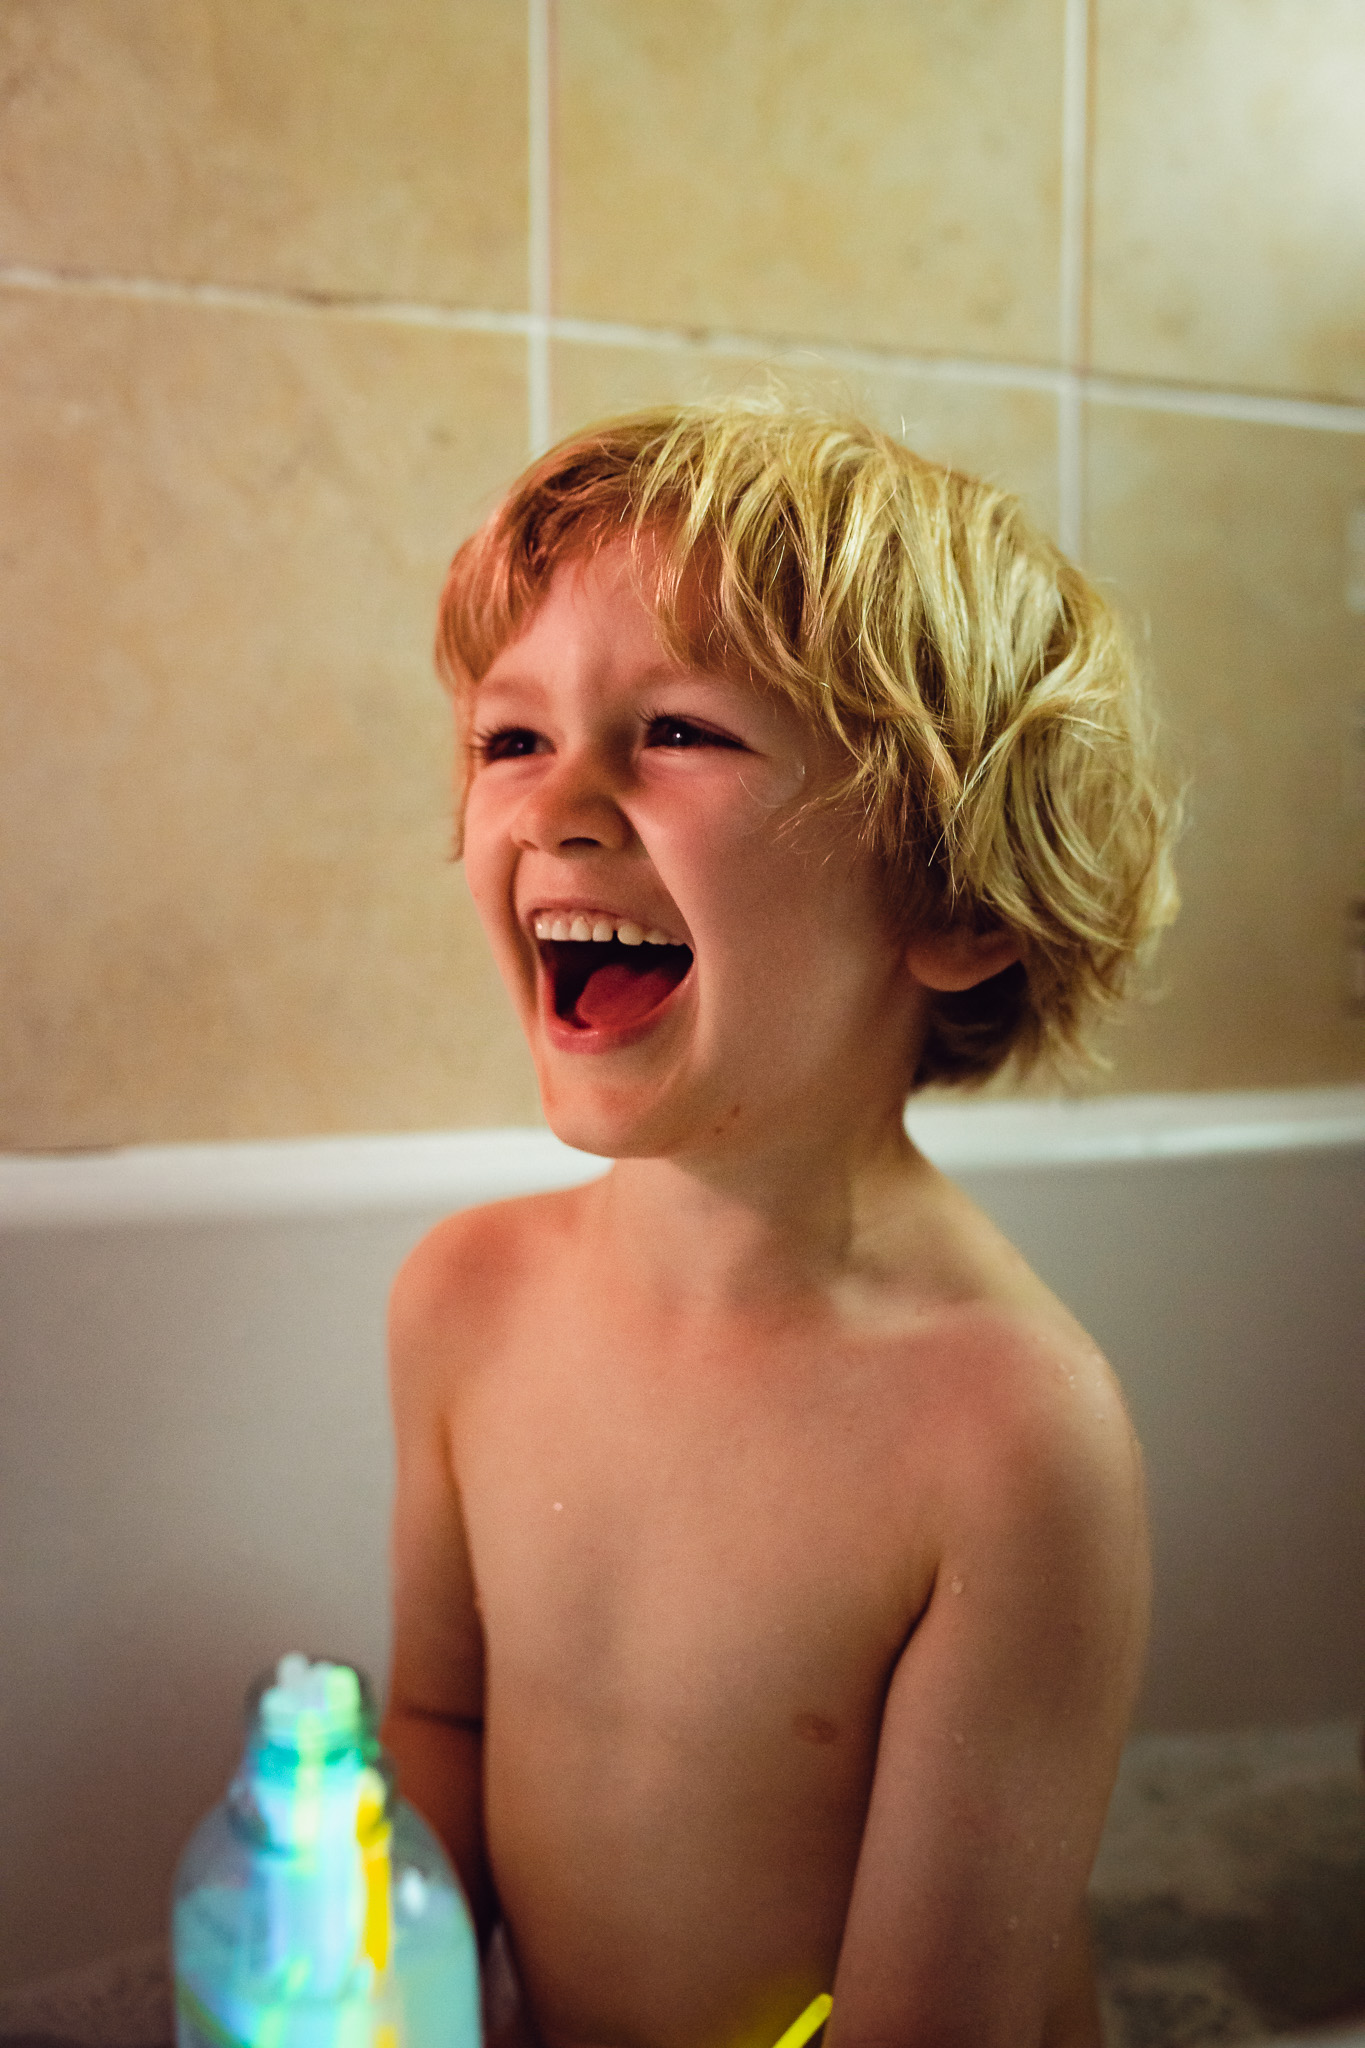 Kai laughing in a bath whilst holding a bottle filled with glow sticks during a family photo session.